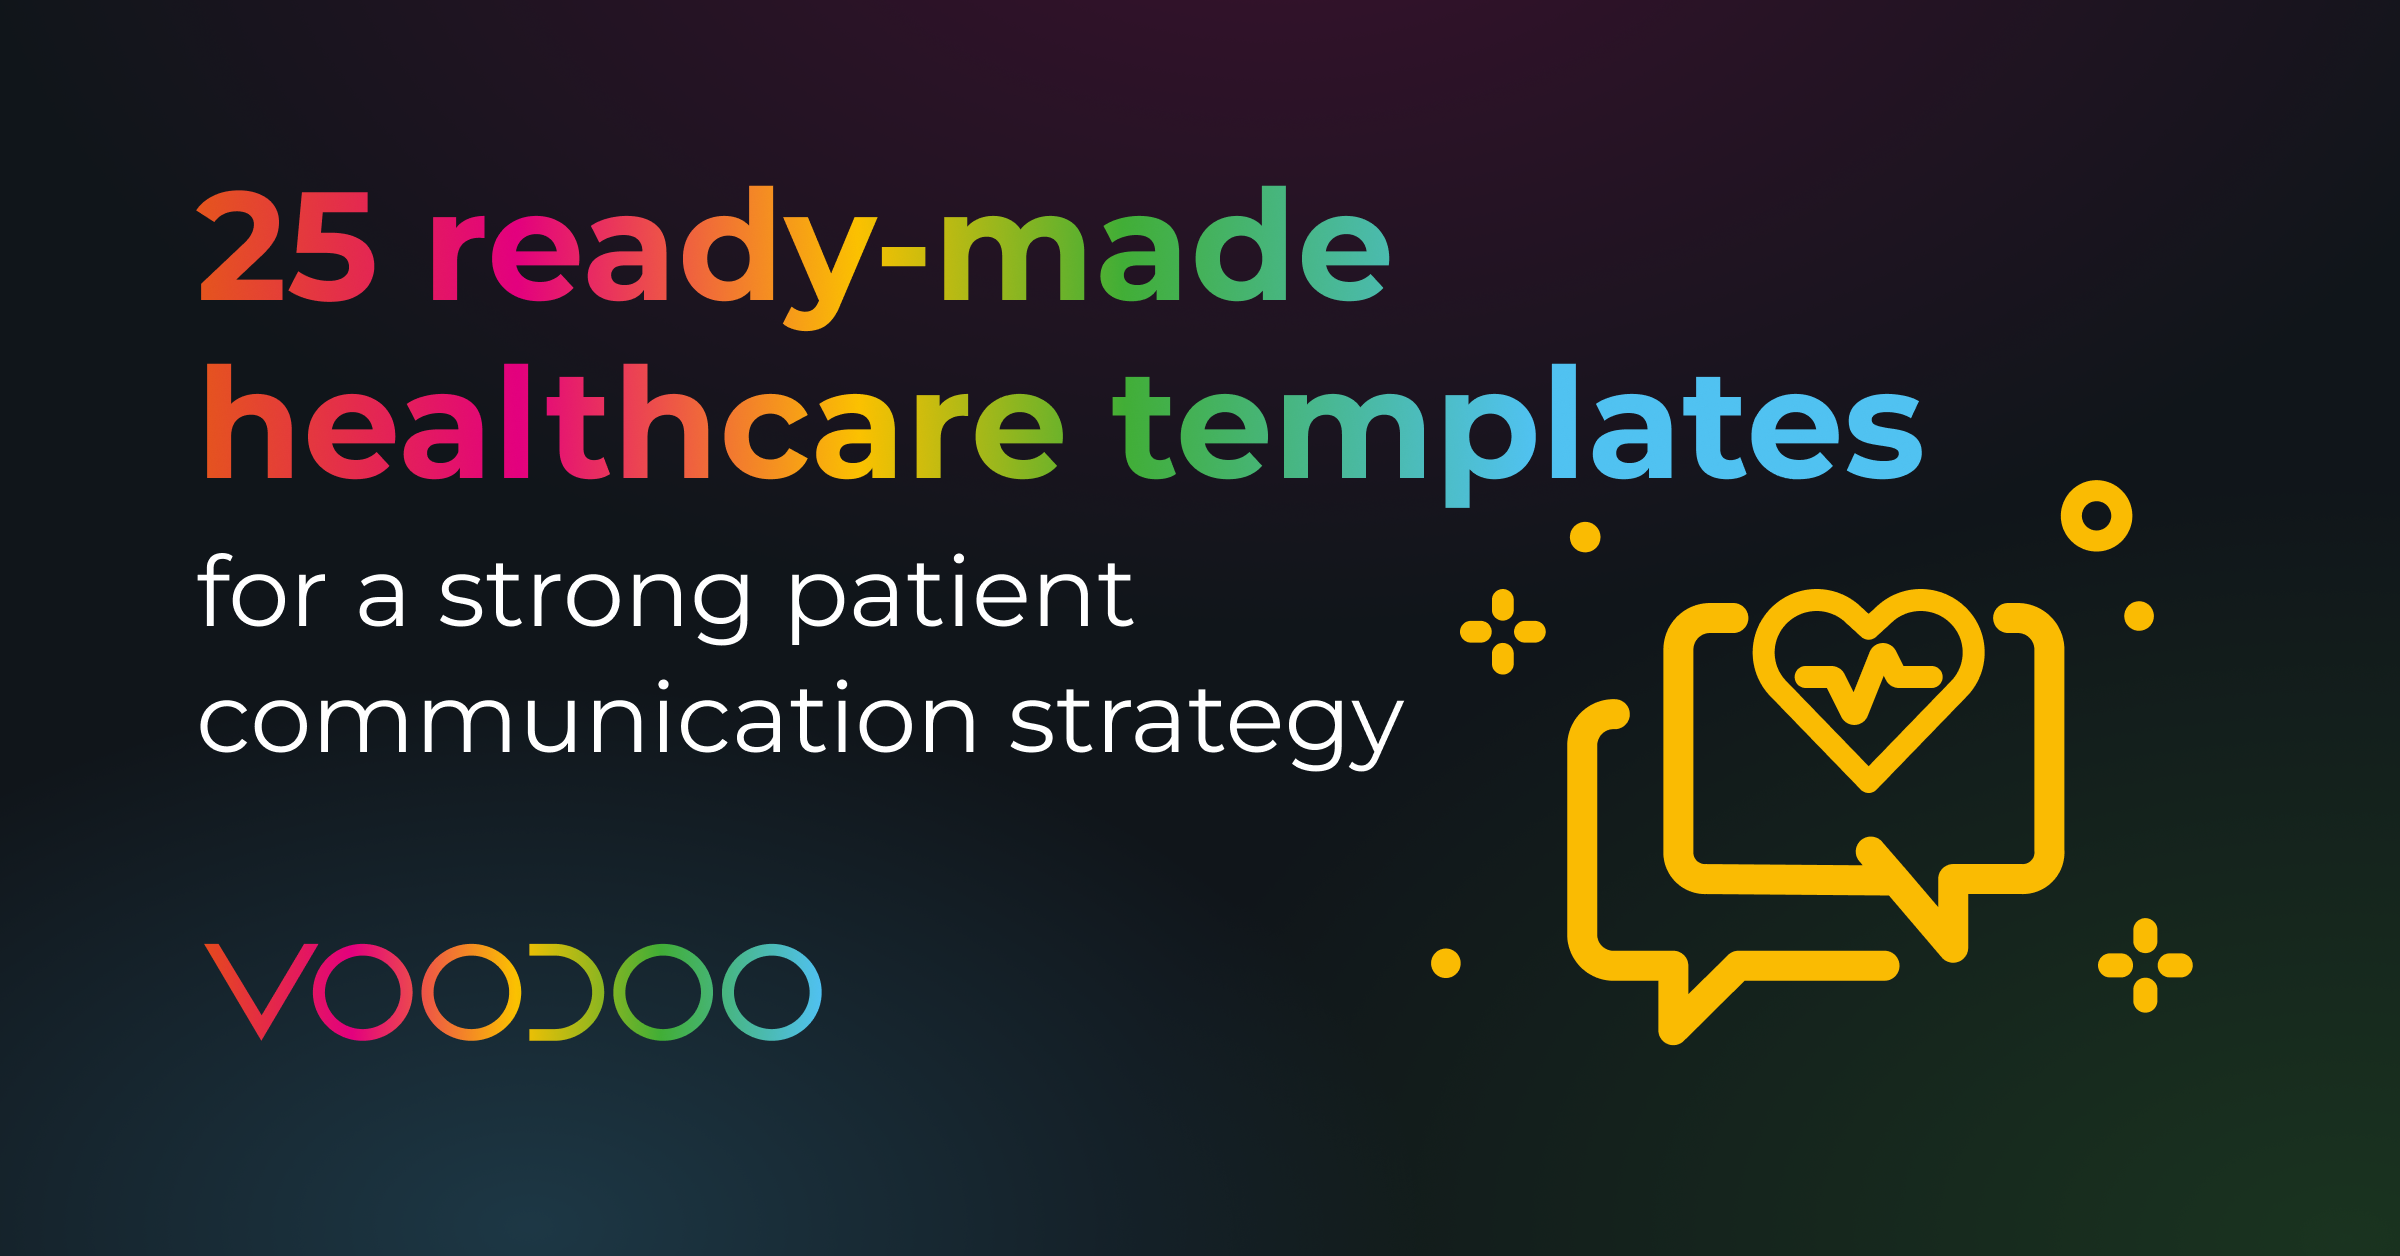 25 ready-made healthcare templates for a strong patient communication strategy